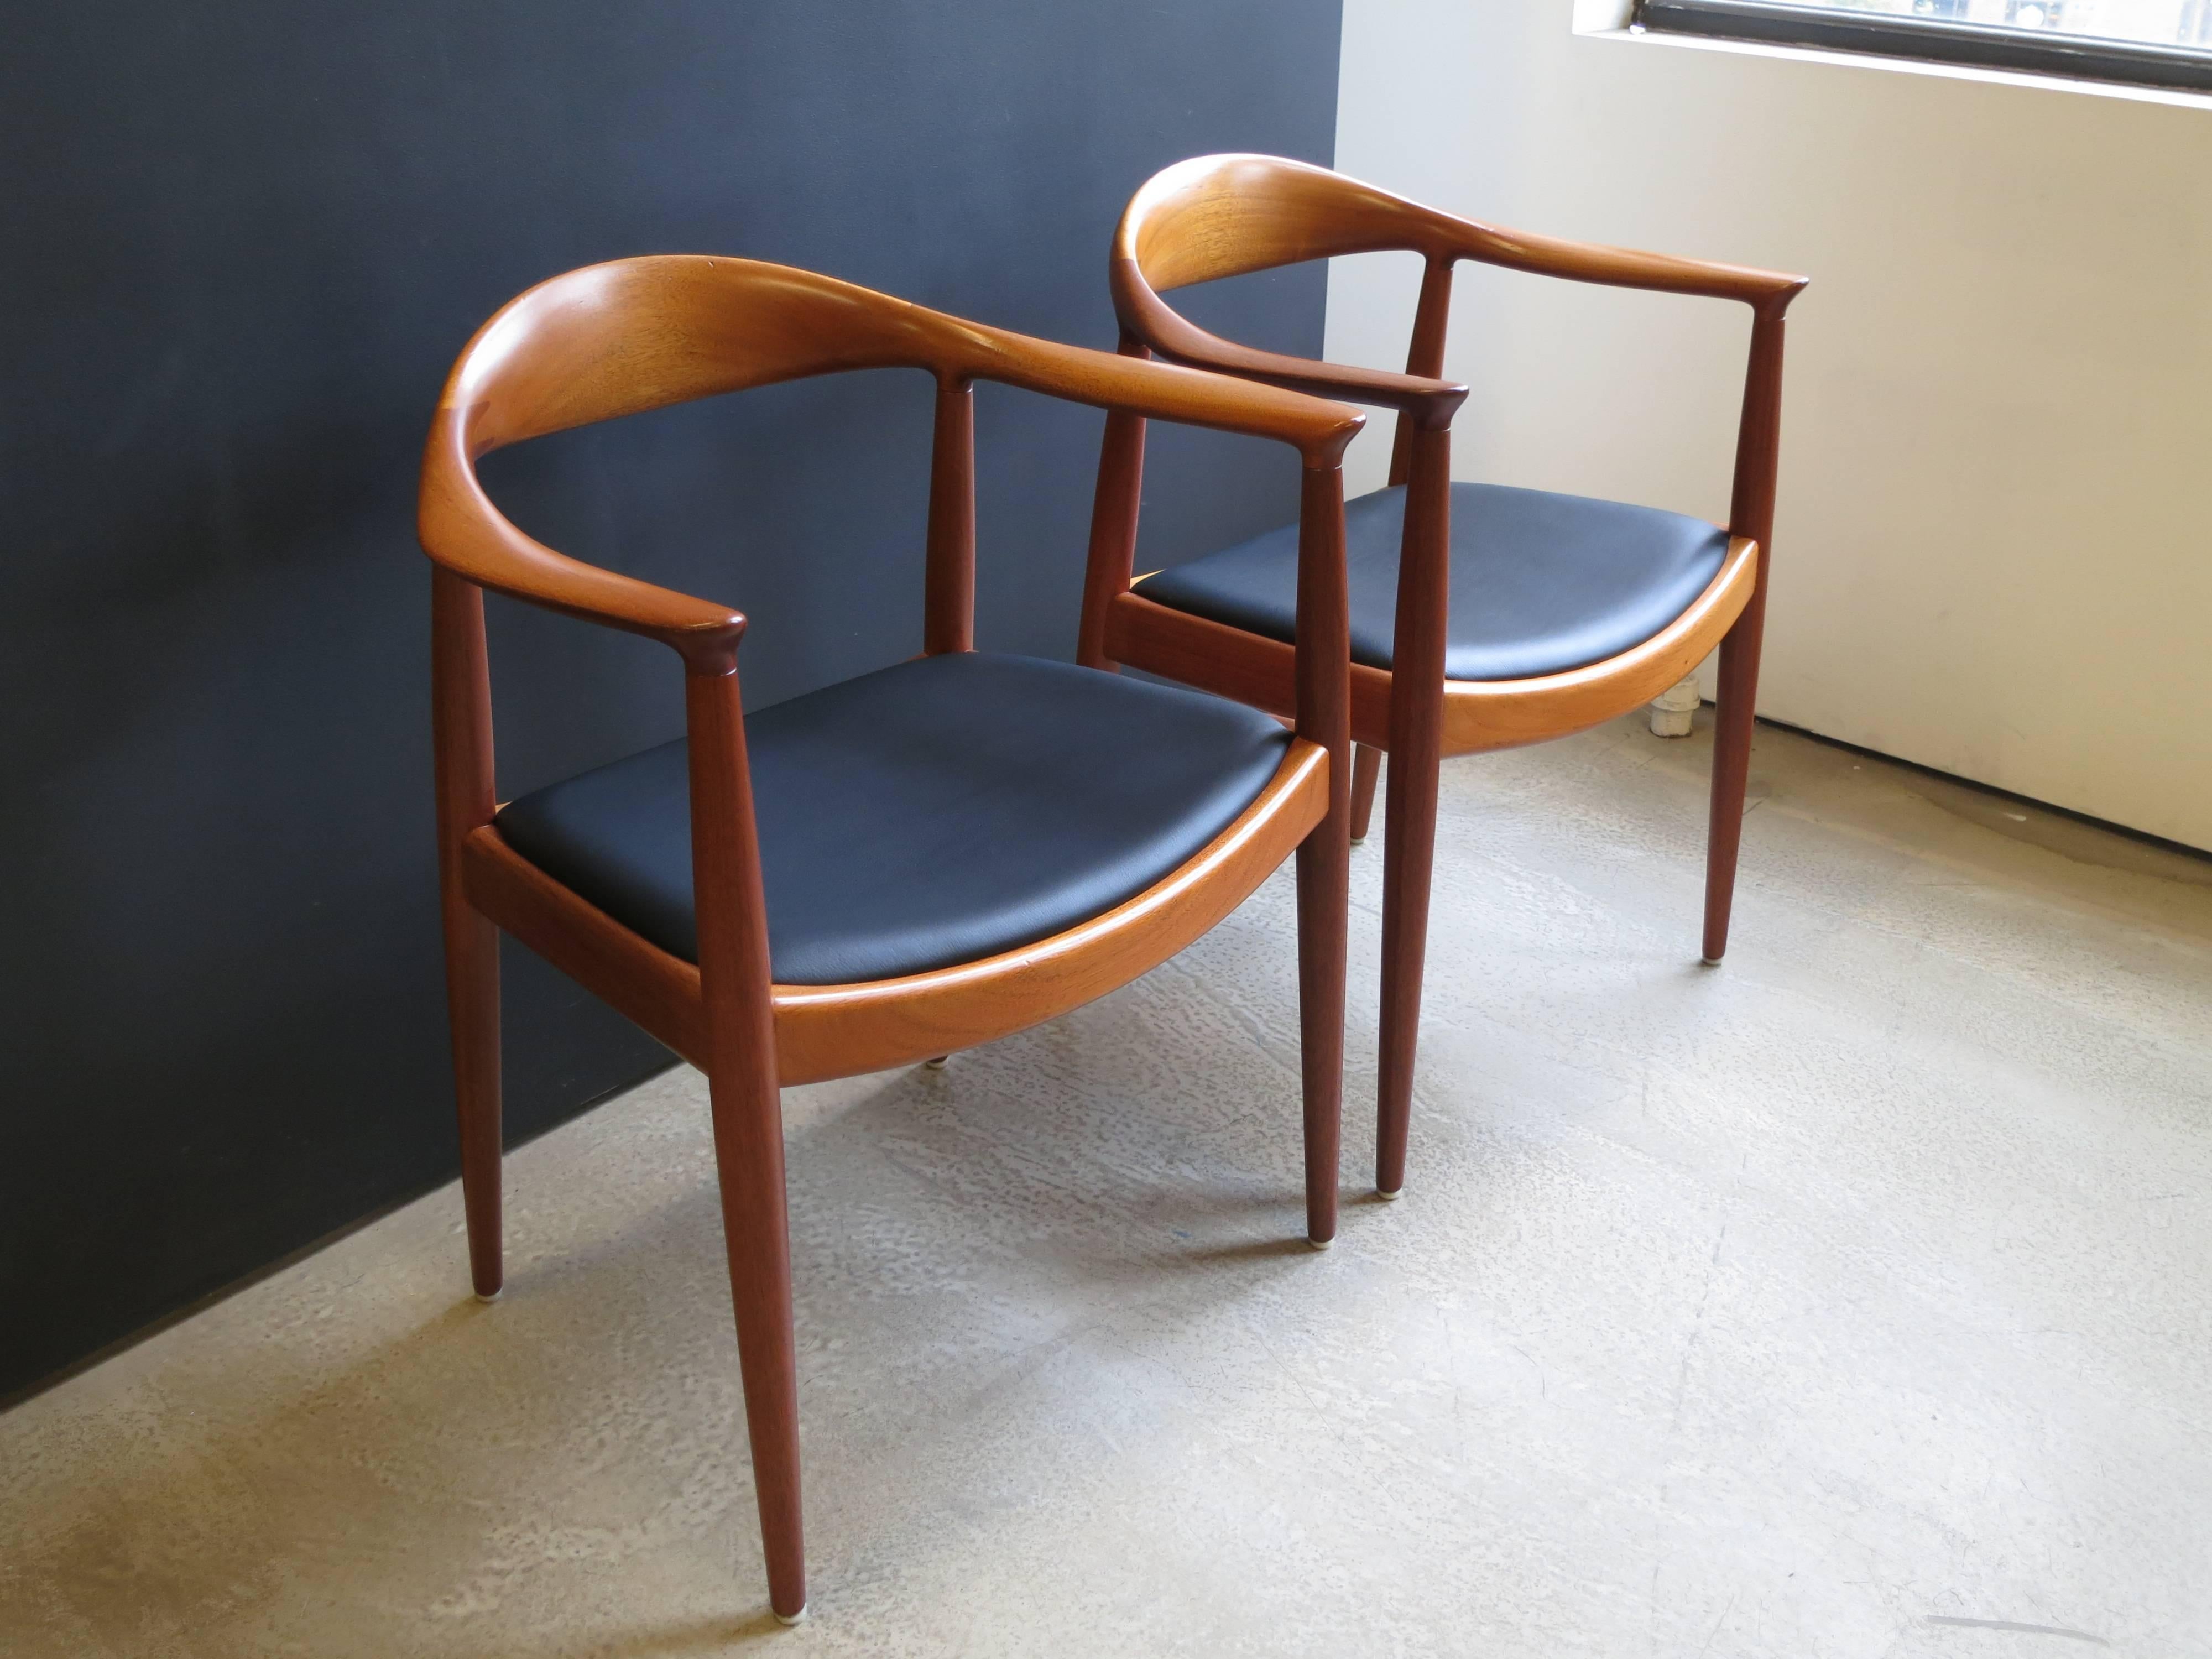 Cabinetmaker’s brand of Johannes Hansen on the underside of the frames.
Frames of mahogany, seats in black leather.

Arm height is 27.50 inches.

Literature
Grete Jalk, ed., 40 Years of Danish Furniture Design: The Copenhagen Cabinet-makers’